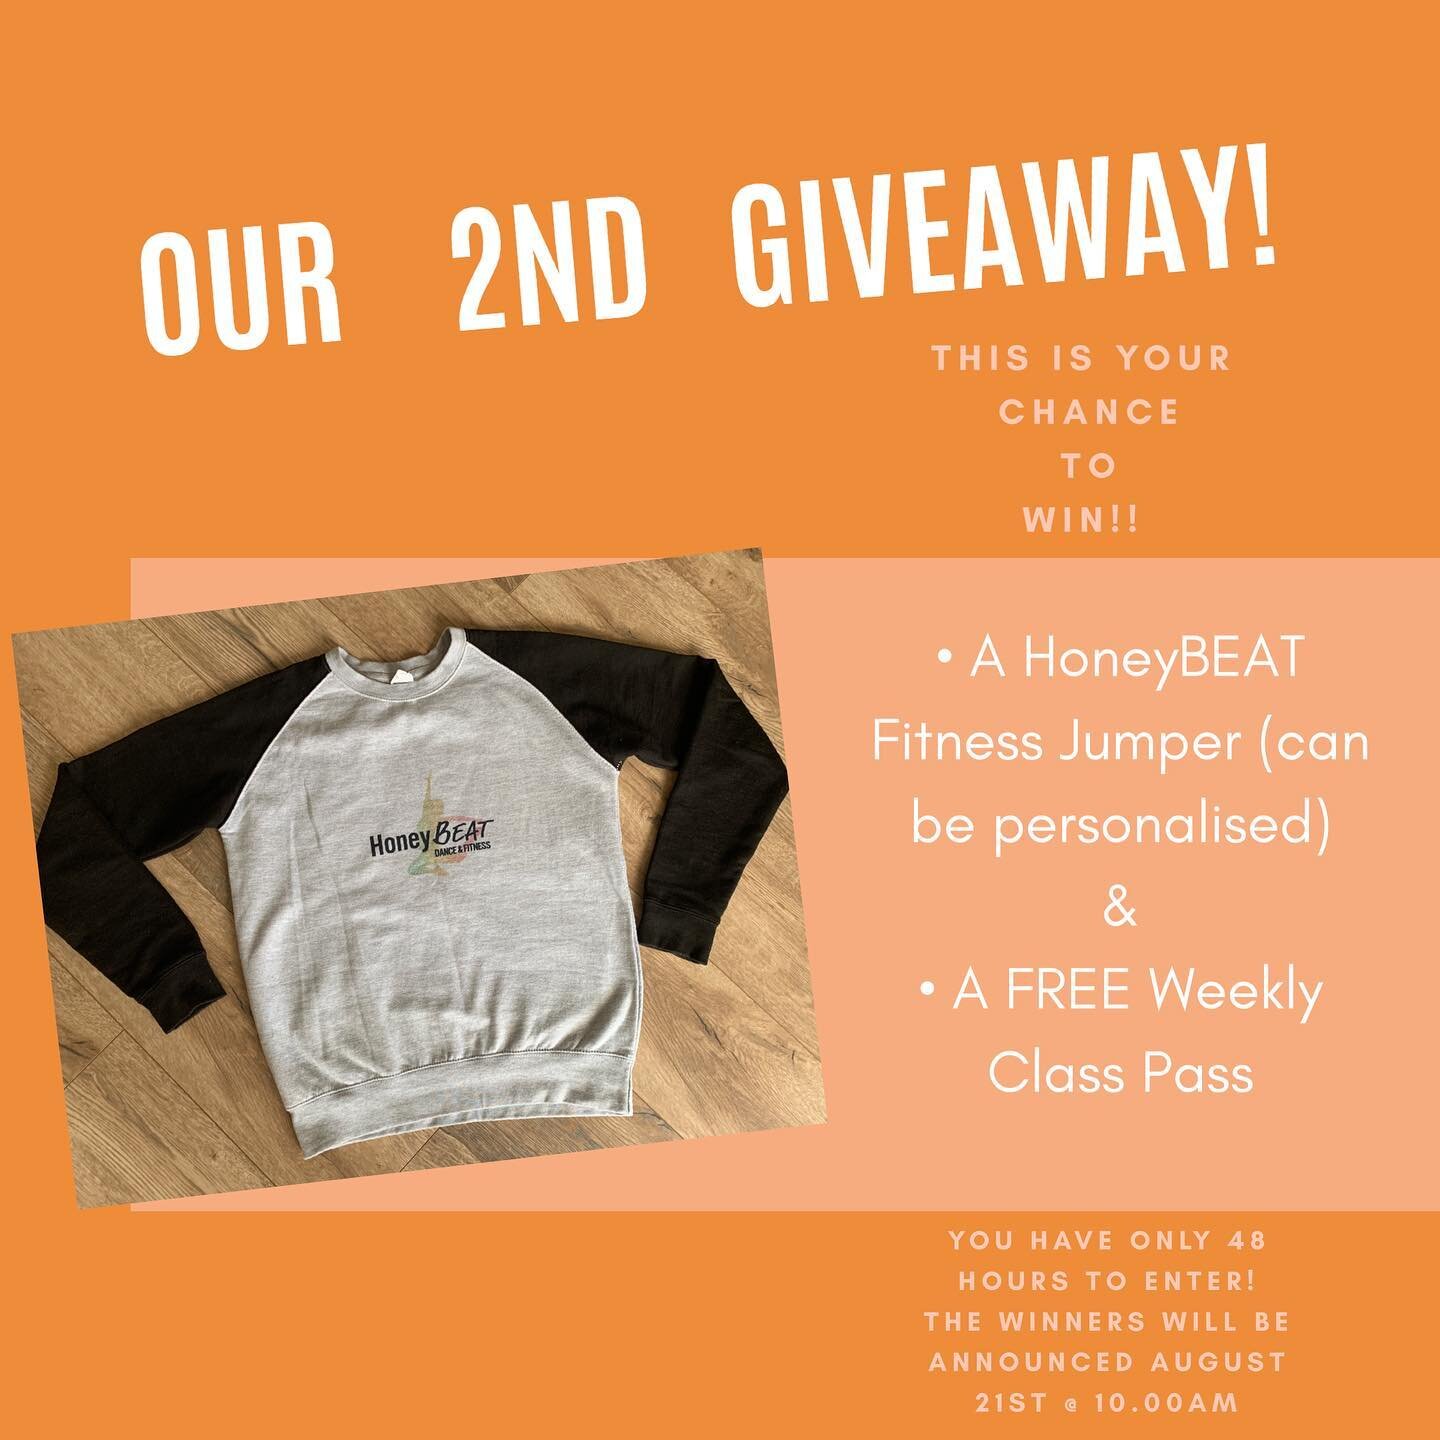 🌟 OUR 2nd GIVEAWAY IS HERE 🌟🌟

One winner will win:
&bull; A HoneyBEAT Fitness Jumper
(You have a choice to personalise)
Sizes S, M, L, XL
&bull; A FREE Weekly Class Pass 

To enter via our Facebook page ONLY(link in bio) and do the following:
* L